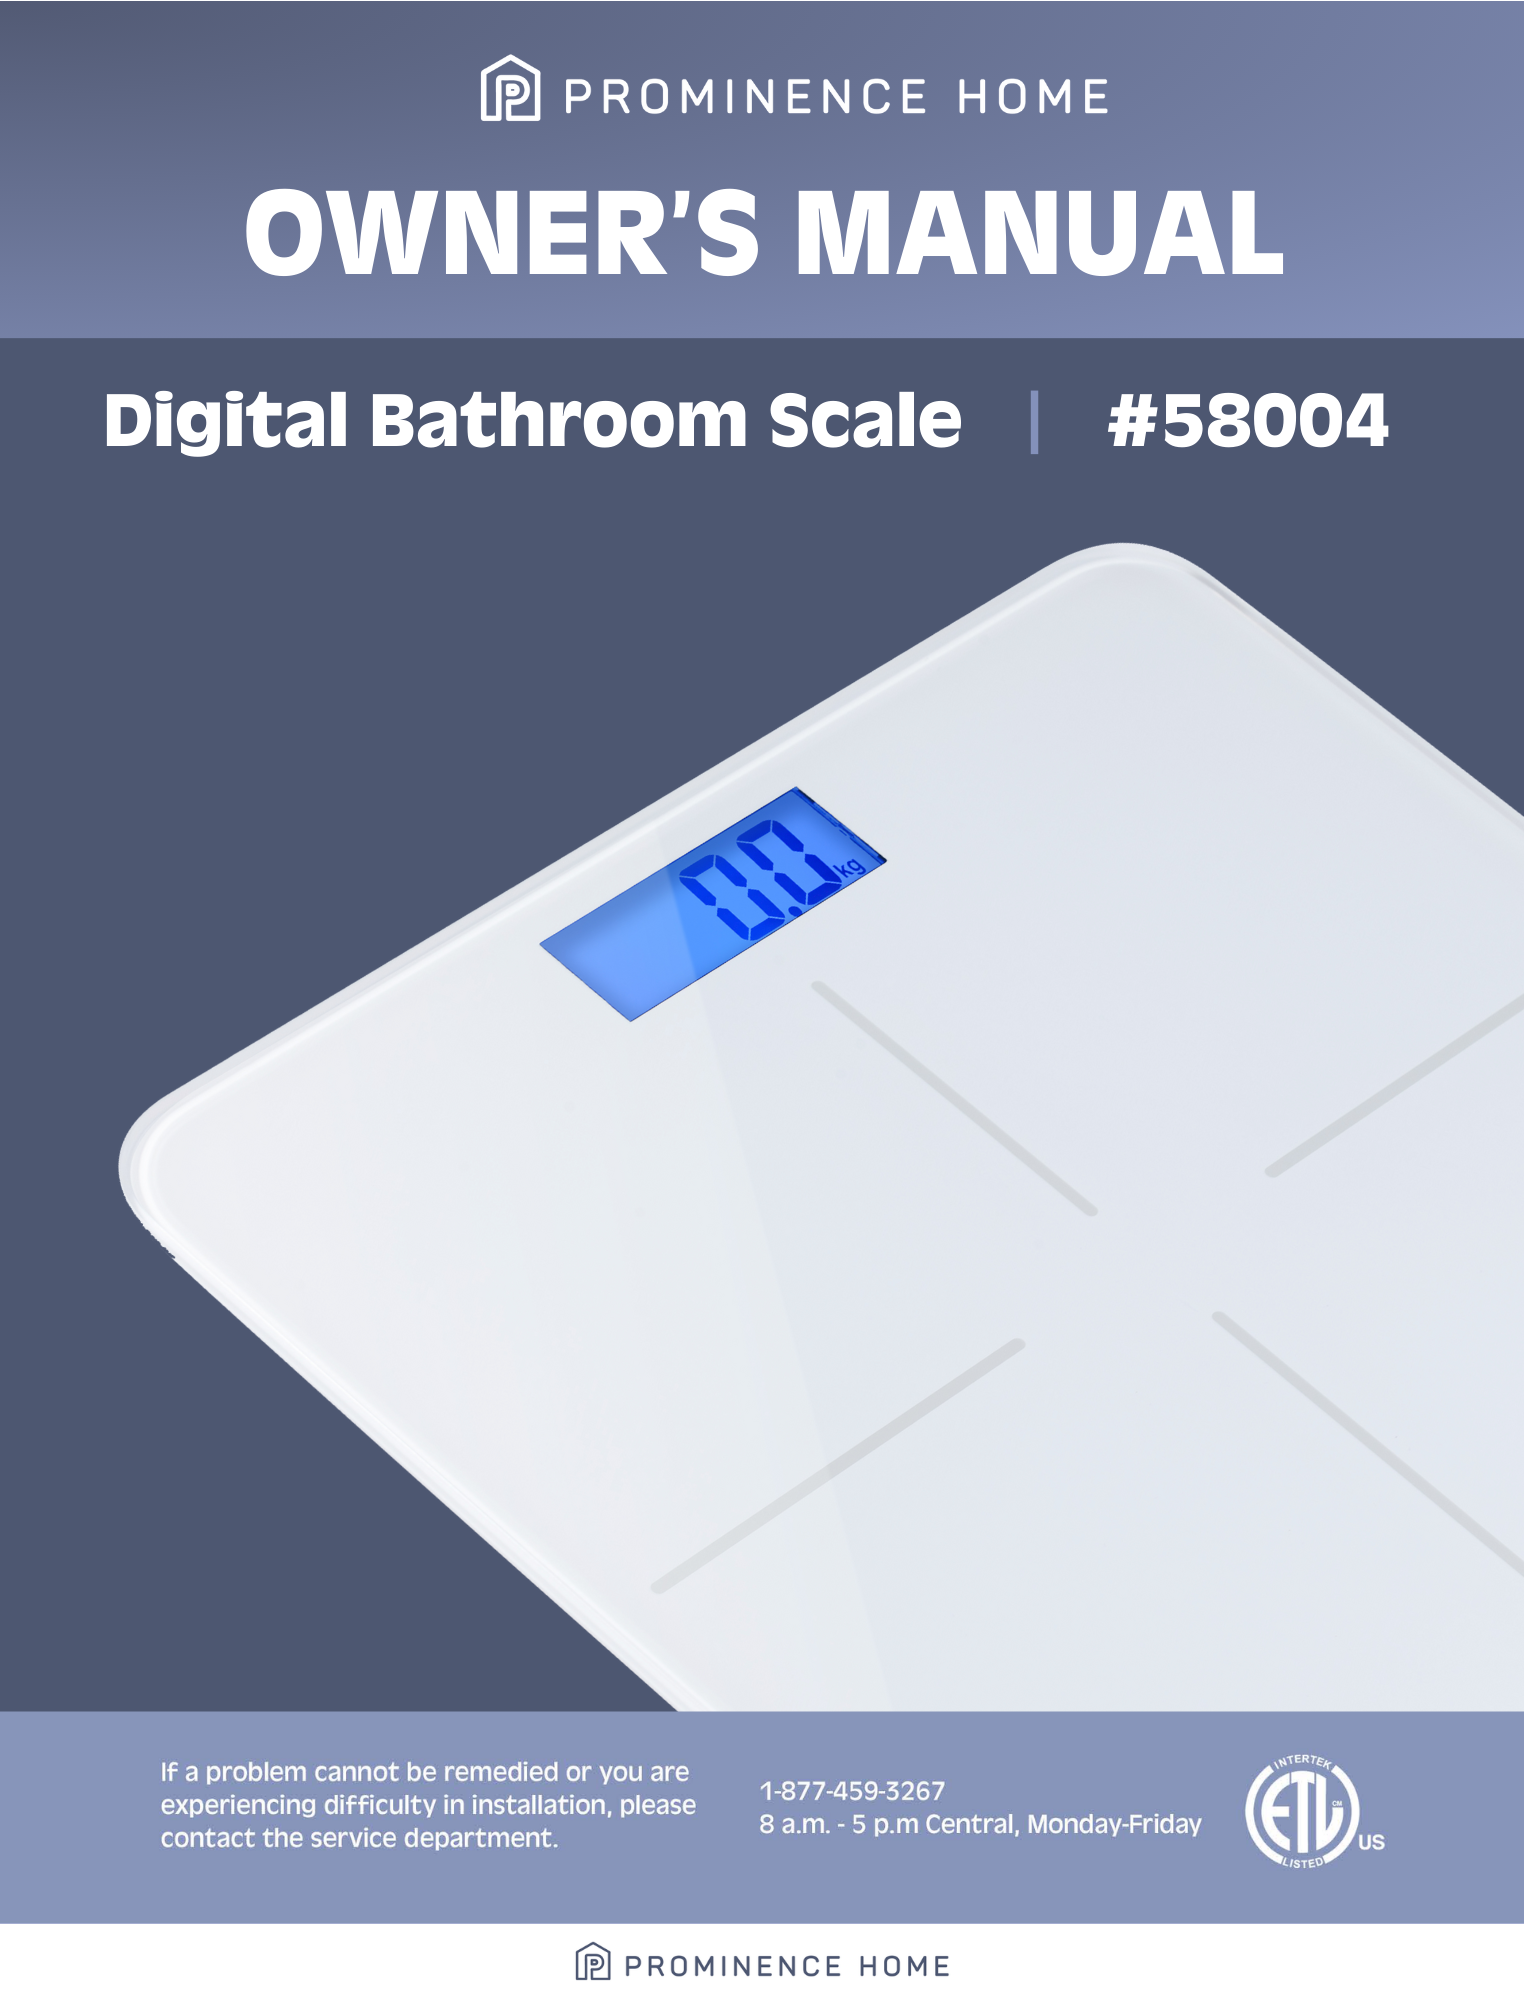 https://cld.accentuate.io/8133260968175/1697146225183/58004-Digital-Bathroom-Scale.png?v=1697146225183&options=